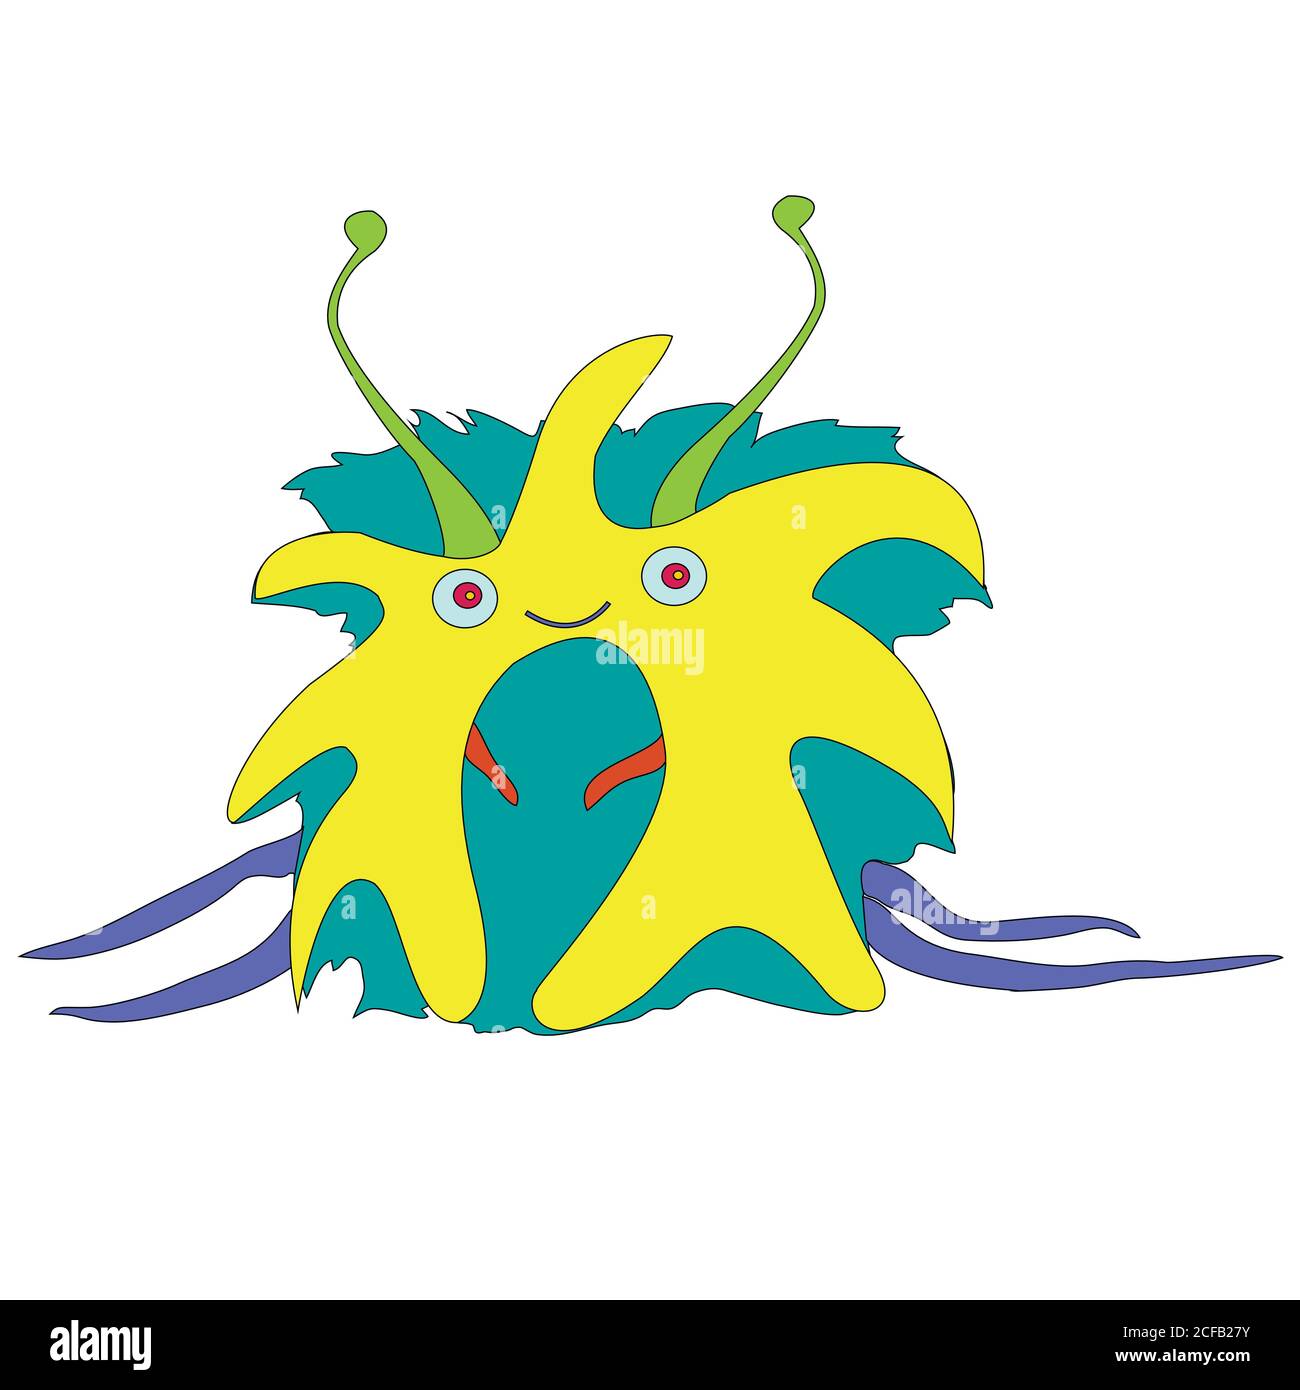 Small, cute funny space monster, isolated on white background. Stock Vector